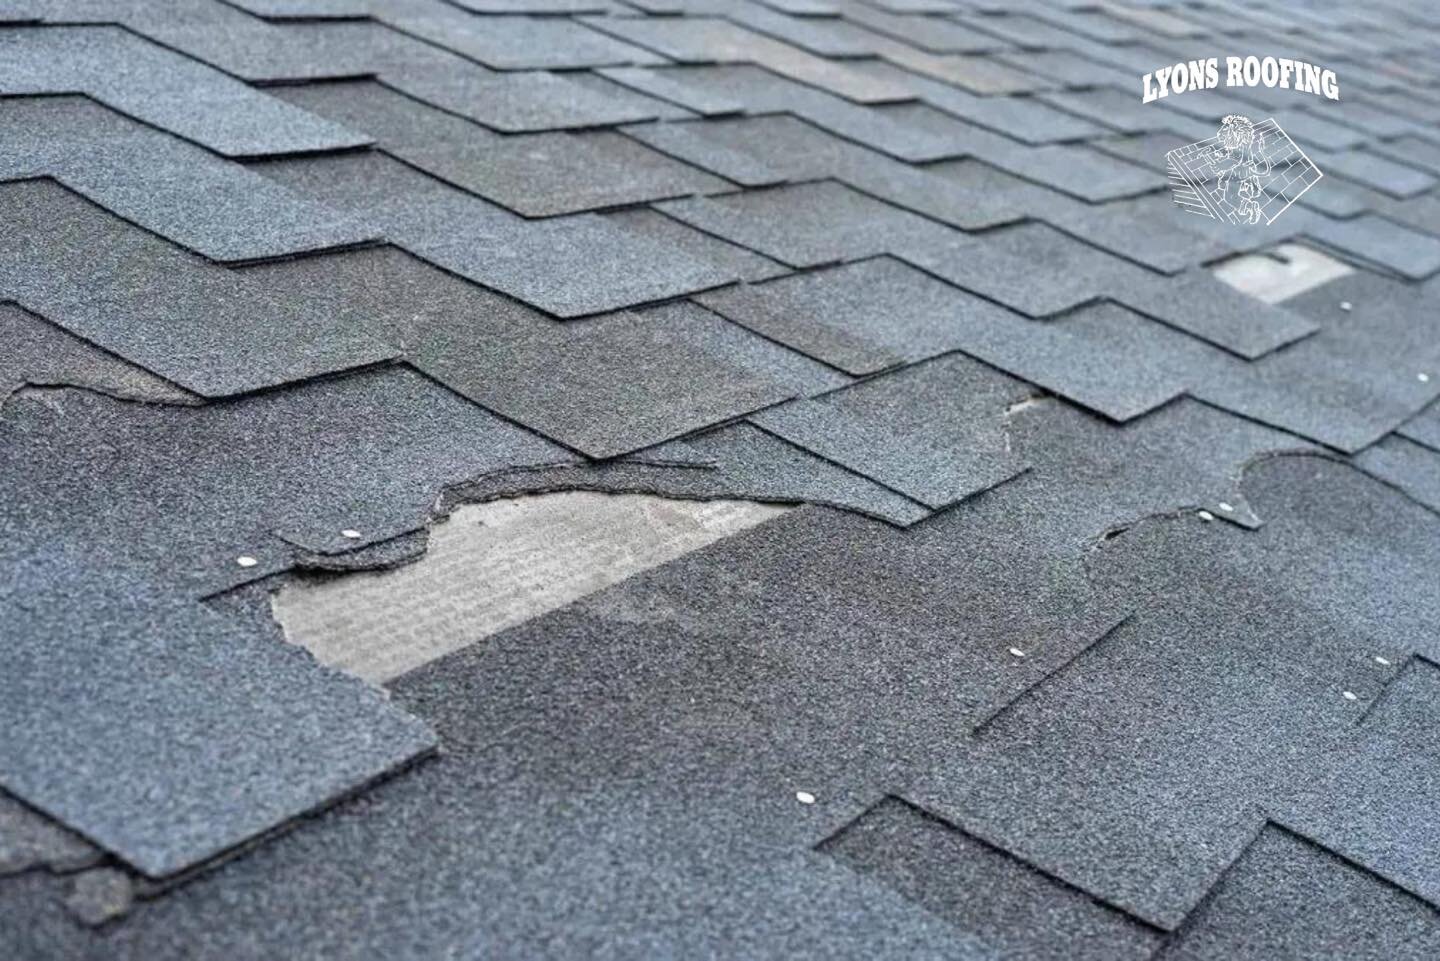 Three Ways to Show Your Roof Some Love this Valentine&rsquo;s Day:

❣️Clean off any dirt and debris:

Your roof may have accumulated some dirt, branches, and other debris from the winter season. By cleaning off your roof, this will help prevent pooli